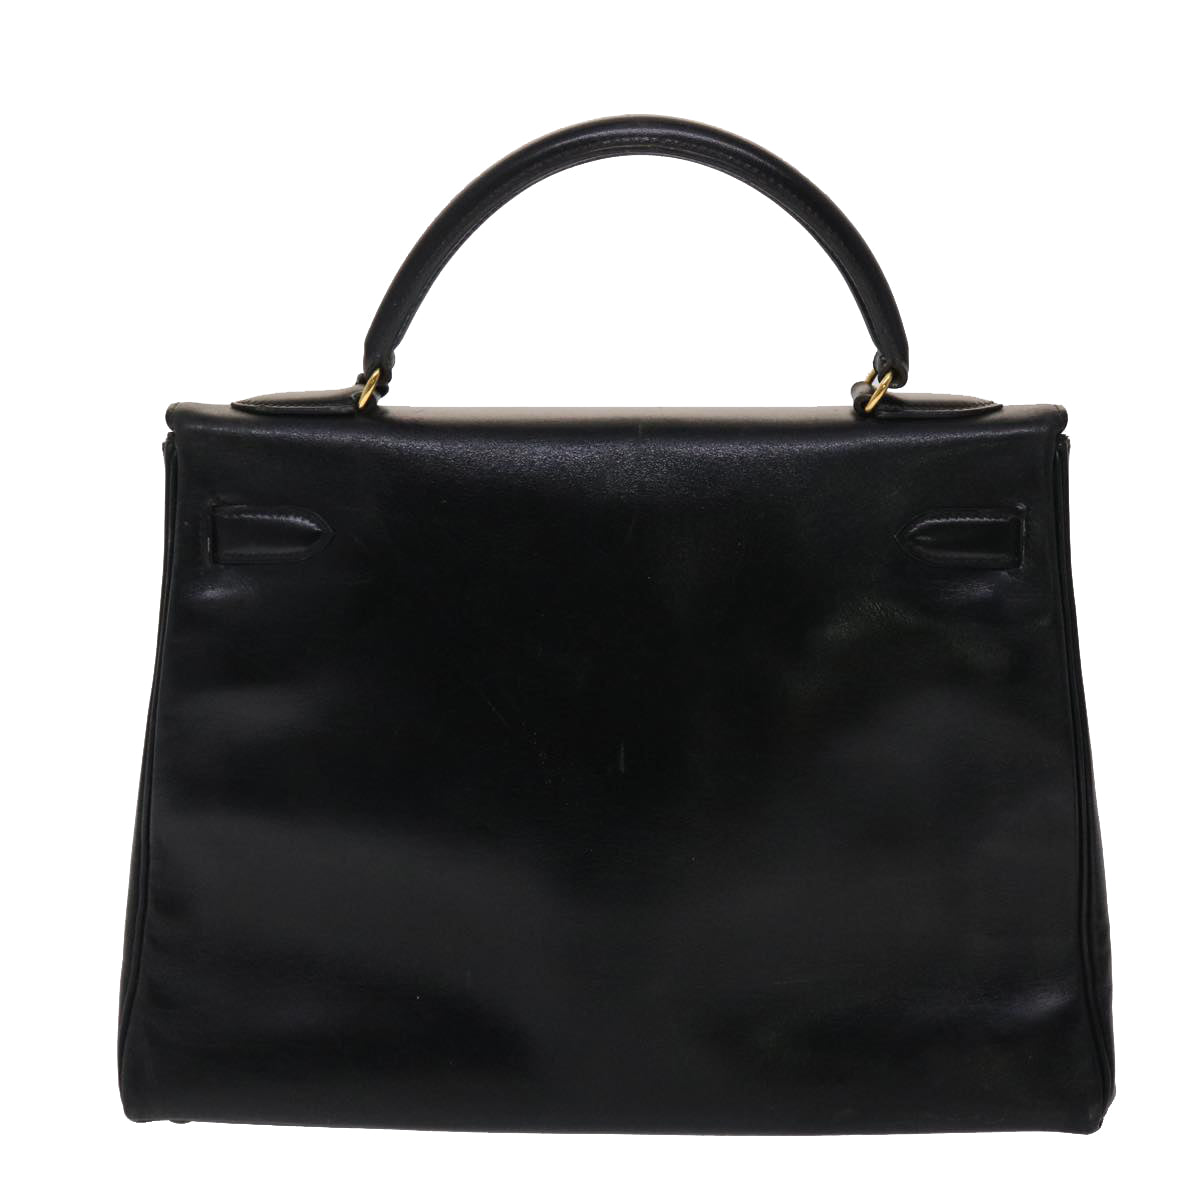 HERMES Kelly 32 Hand Bag Leather Black Auth ni110A - 0